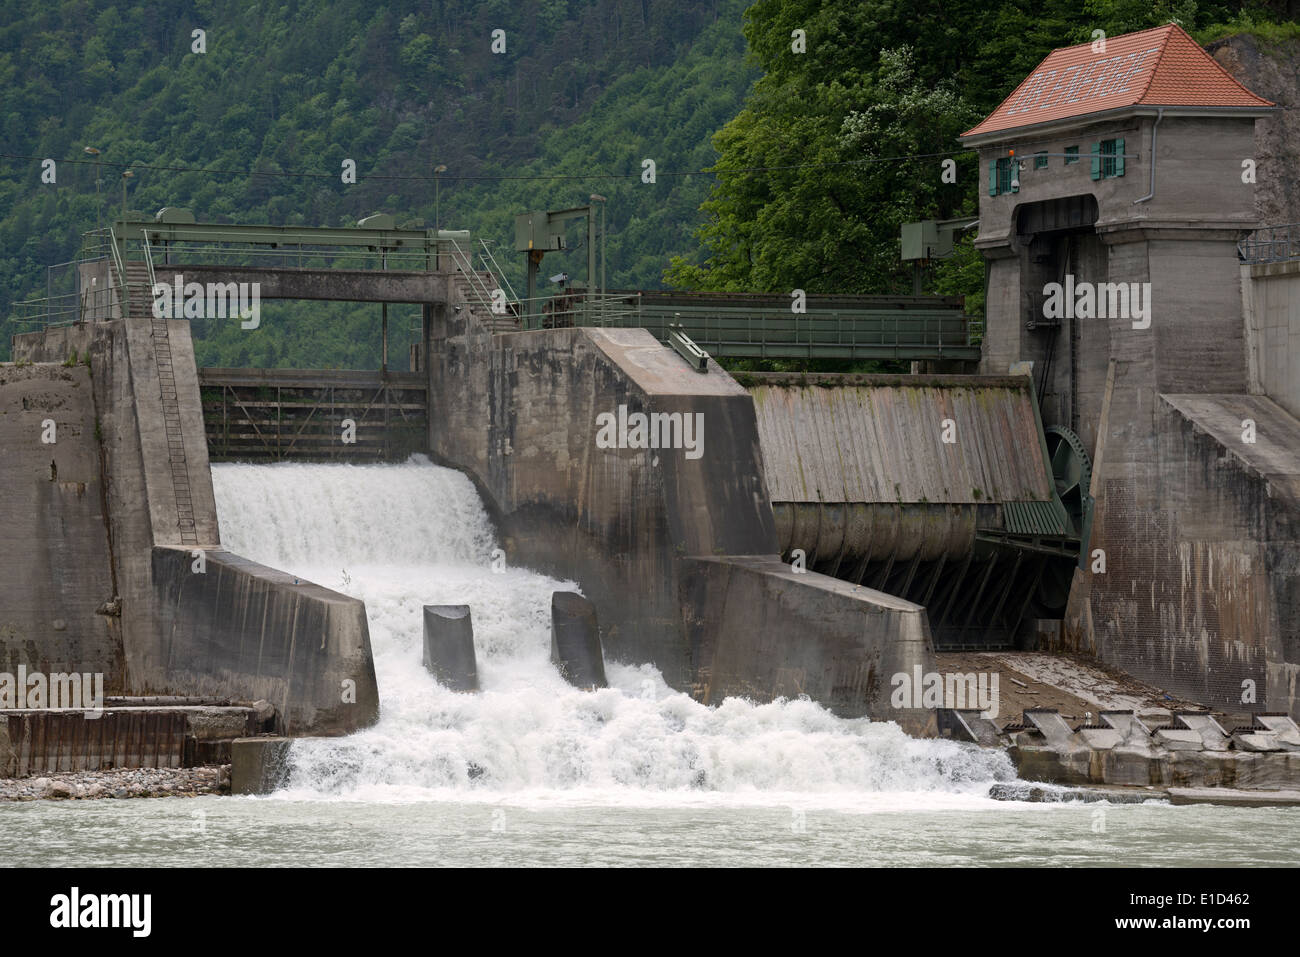 Hydroelectric power station owned by DB Energie part of German Railways to produce electricity to power trains Stock Photo